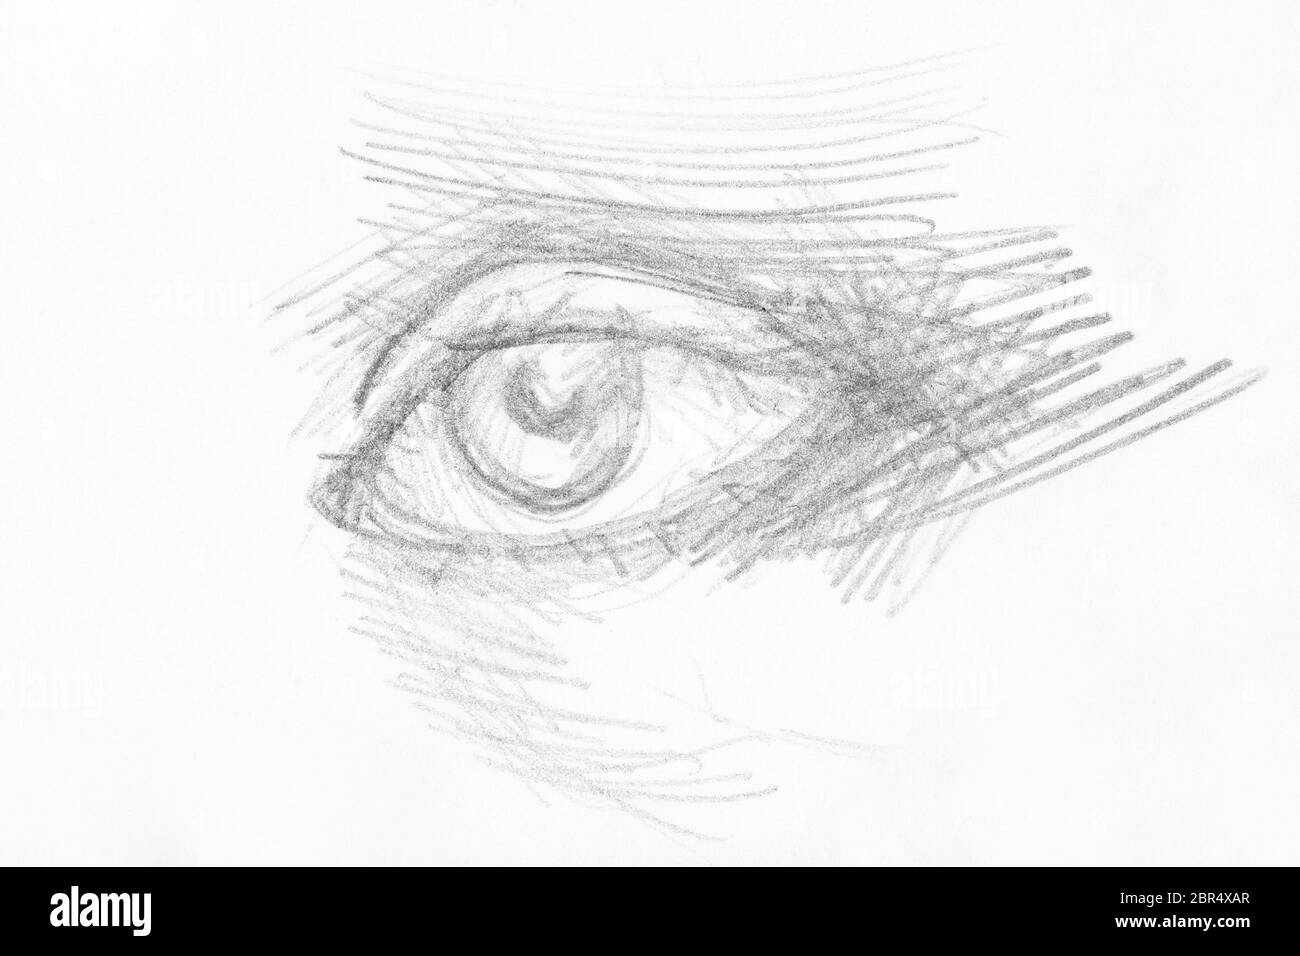 Black And White Normal Paper Pencil eyes sketch, Size: A-4 Size